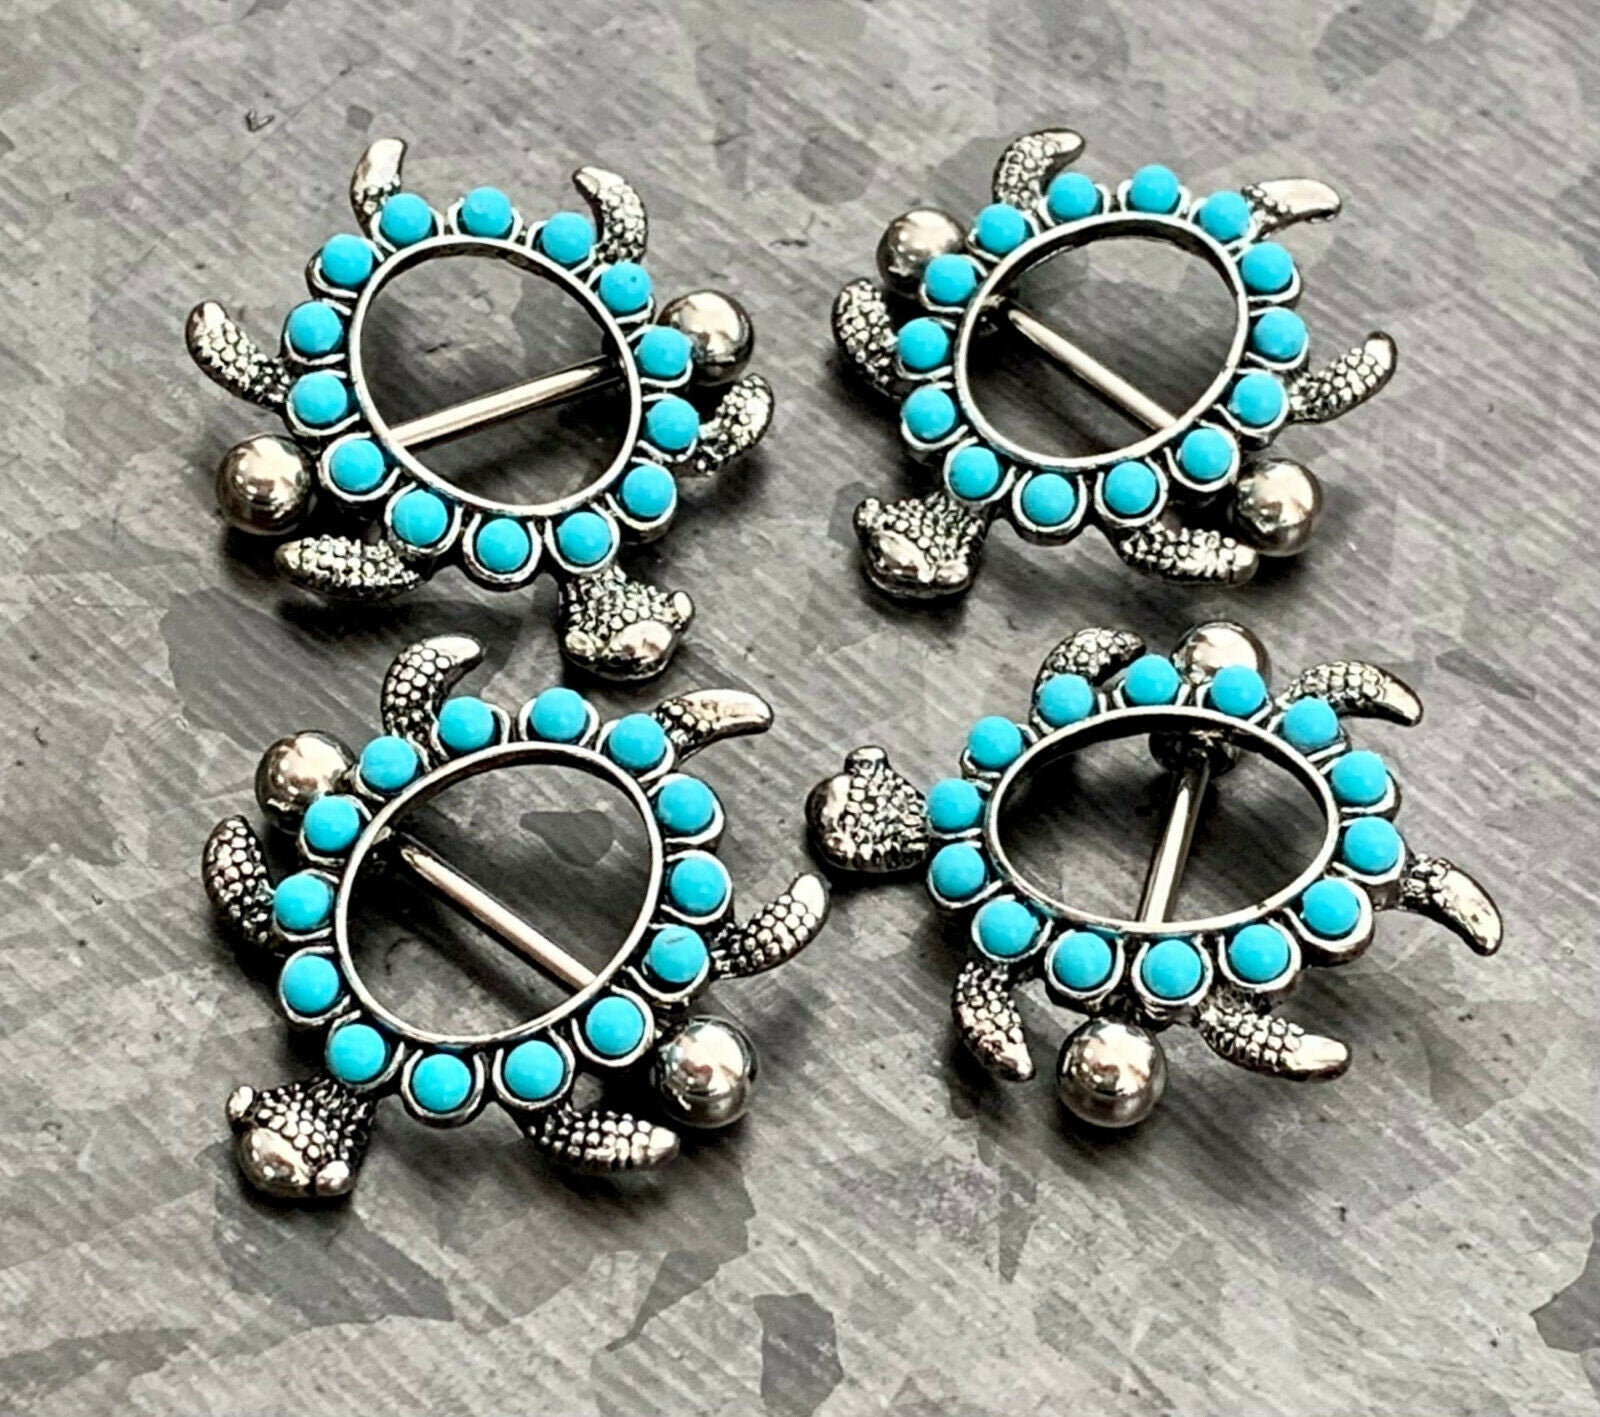 PAIR of Unique Teal Turtle Design Steel Nipple Barbells/Shields/Rings - Barbell 14g, 19mm (3/4") - Wearable length 12mm(1/2") x 14mm(9/16")!